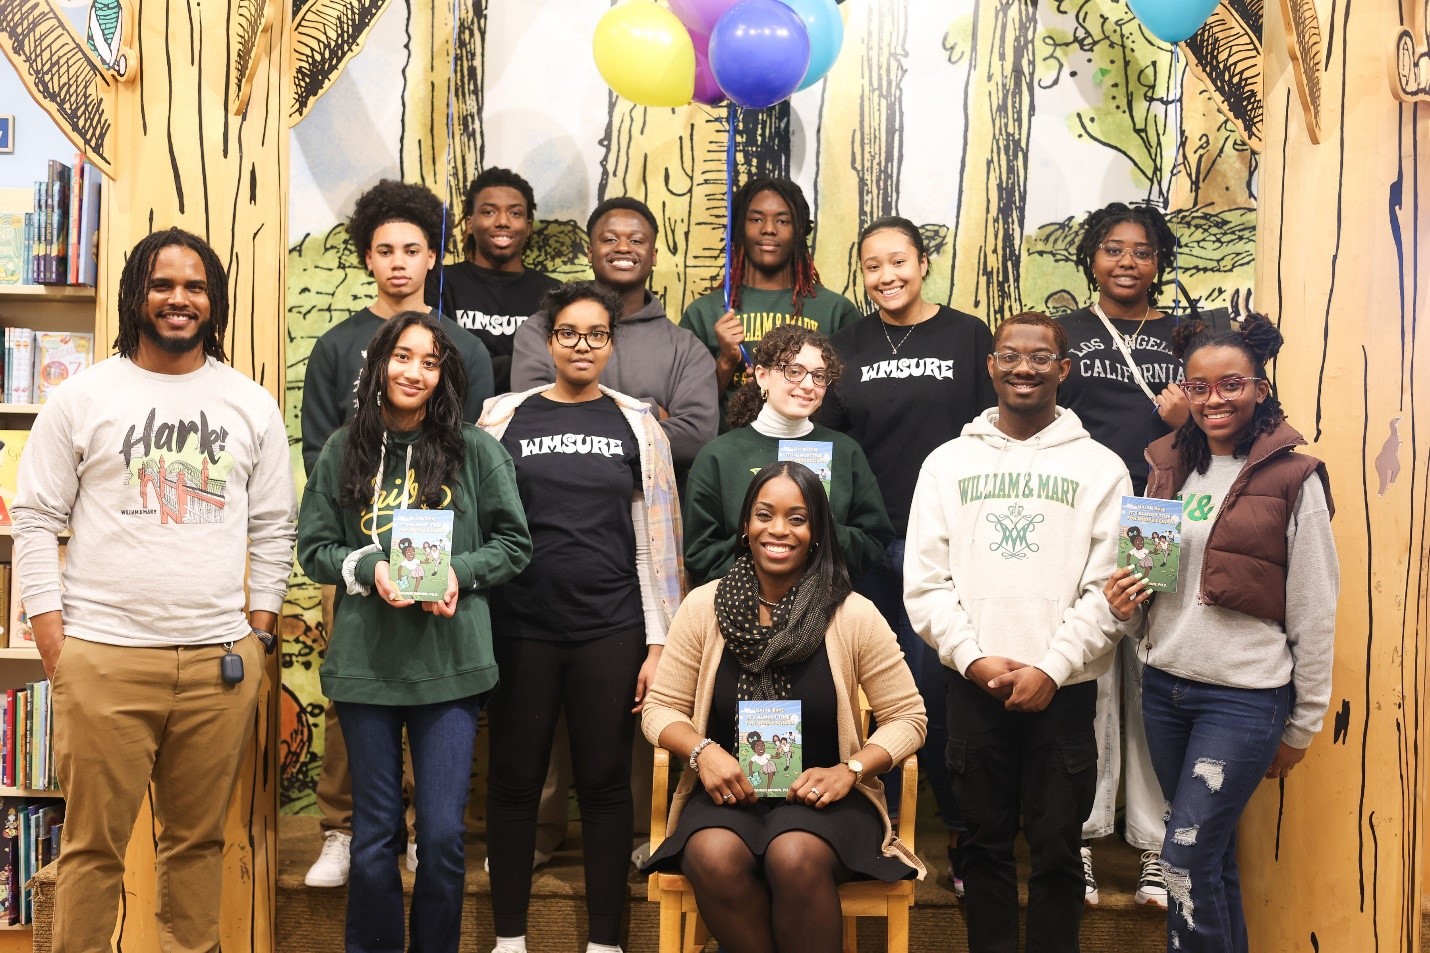 A dozen WMSURE students and program staff joined Dr. Terainer Brown from the School of Education for an inaugural “Career Café” event for K-8 students in Newport News, Virginia on Feb. 24. (Courtesy photo)